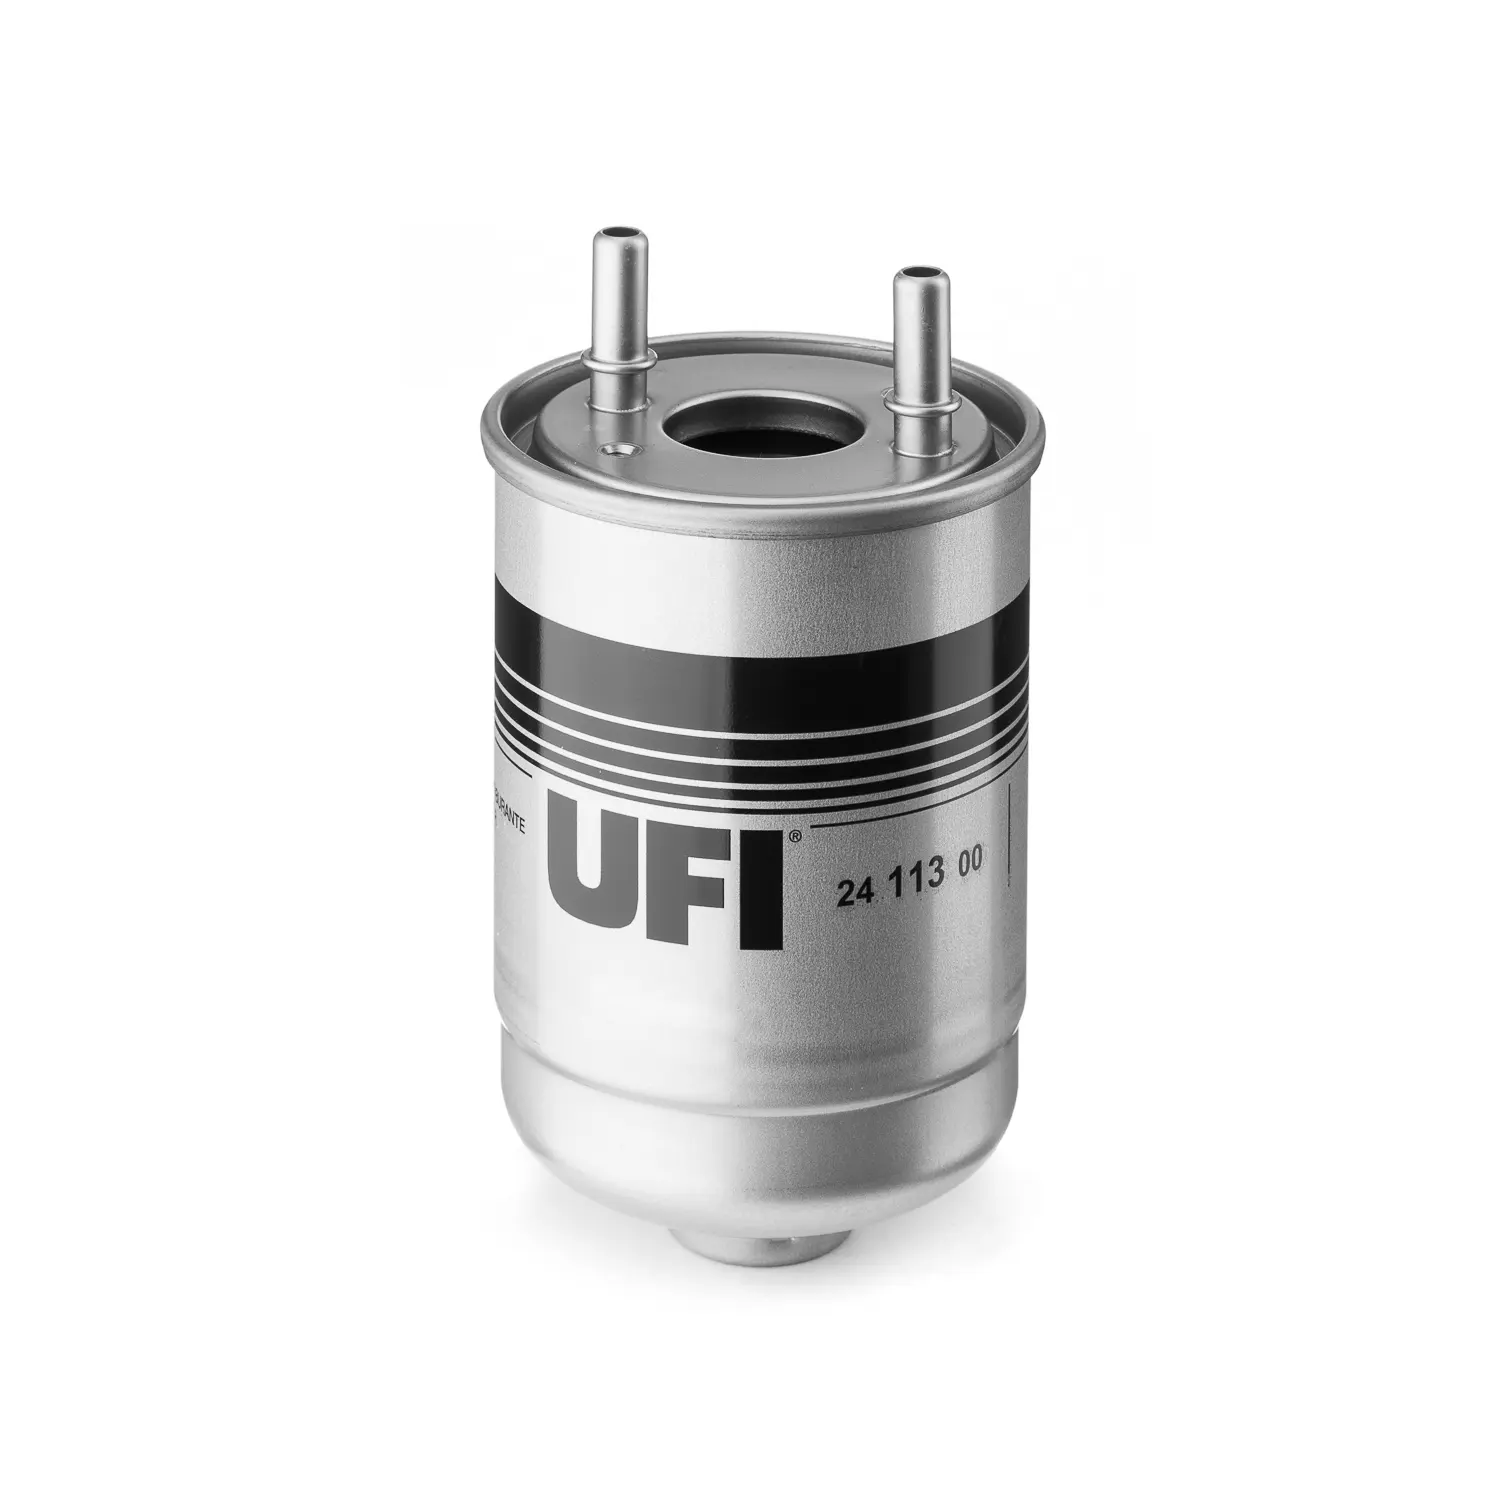 Next-Level Engine Fuel Cleanliness - UFI Filters 24.113.00 - Definitive Protection for Your Vehicle Engine